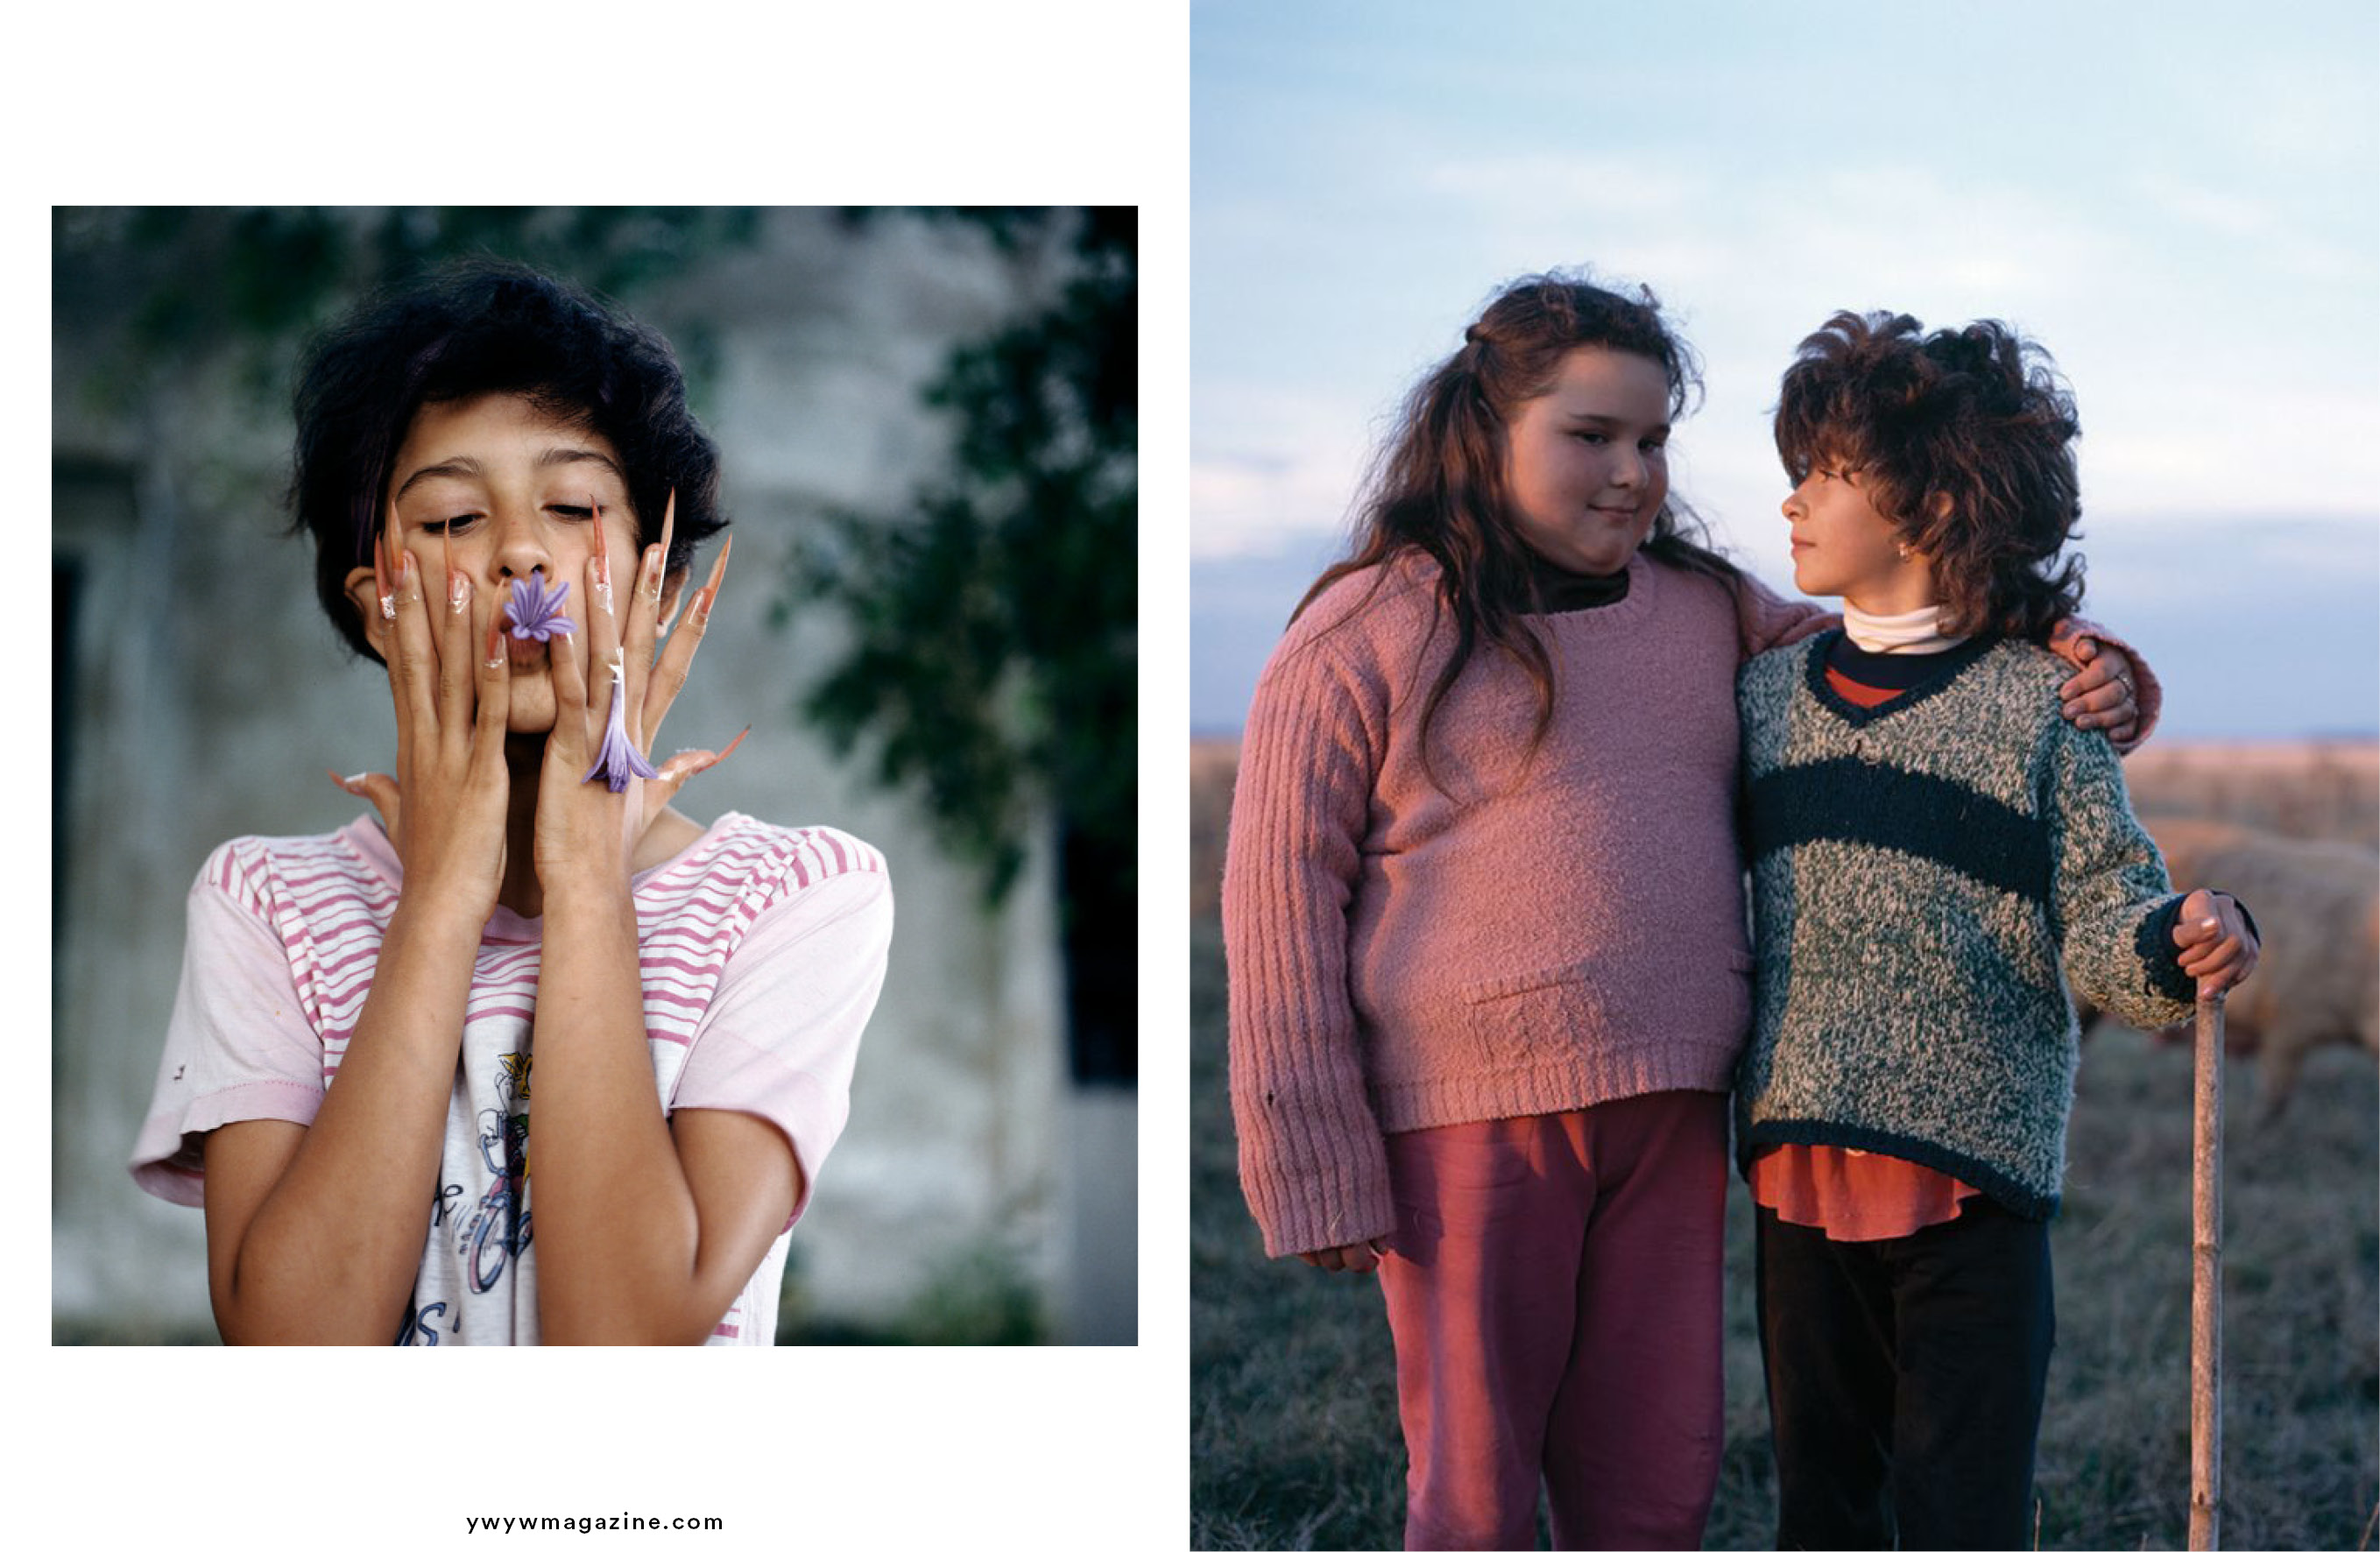 Alessandra Sanguinetti: “The Adventures of Guille and Belinda and The ...